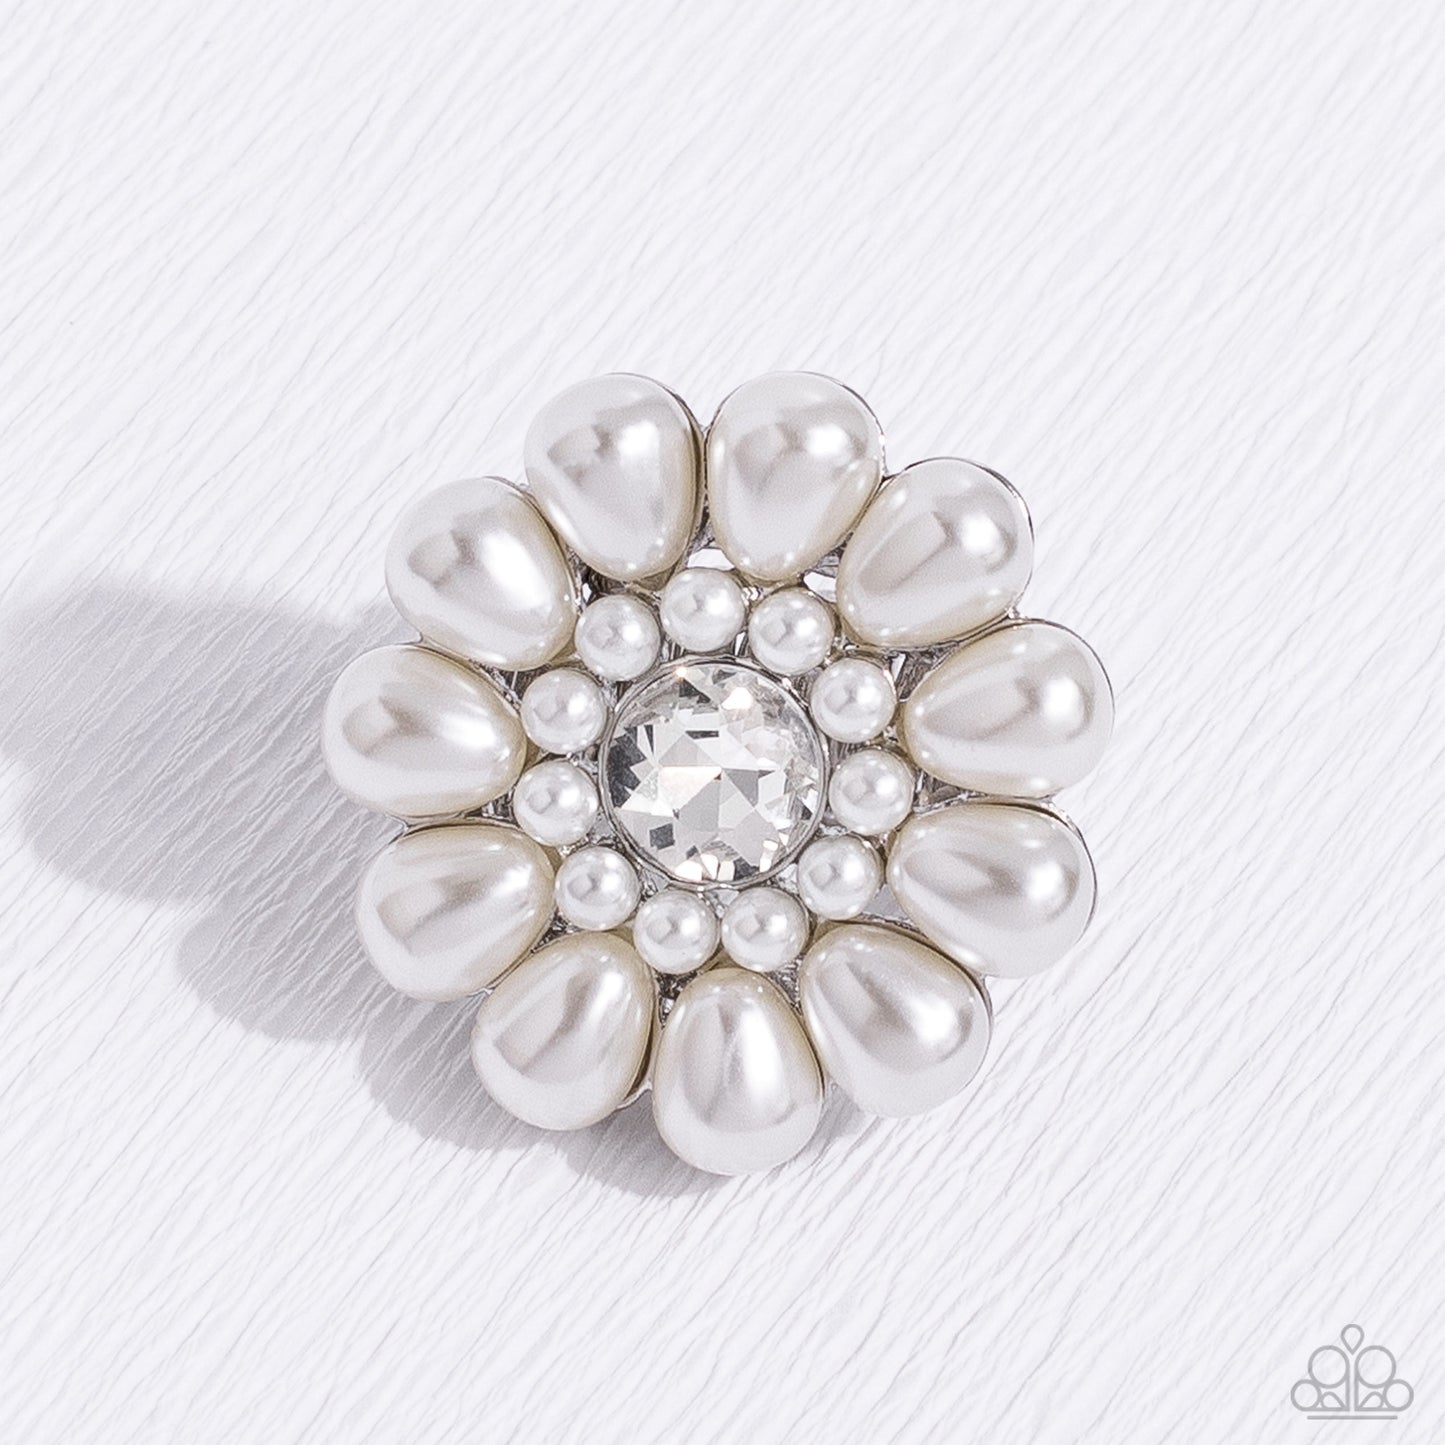 PEARL Talk - White Pearl - Silver Ring - Paparazzi Accessories - Featuring a glassy white gem center, bubbly oversized pearl petals fan out from dainty pearl settings atop the finger on airy silver bands for a sophisticated floral fashion ring.